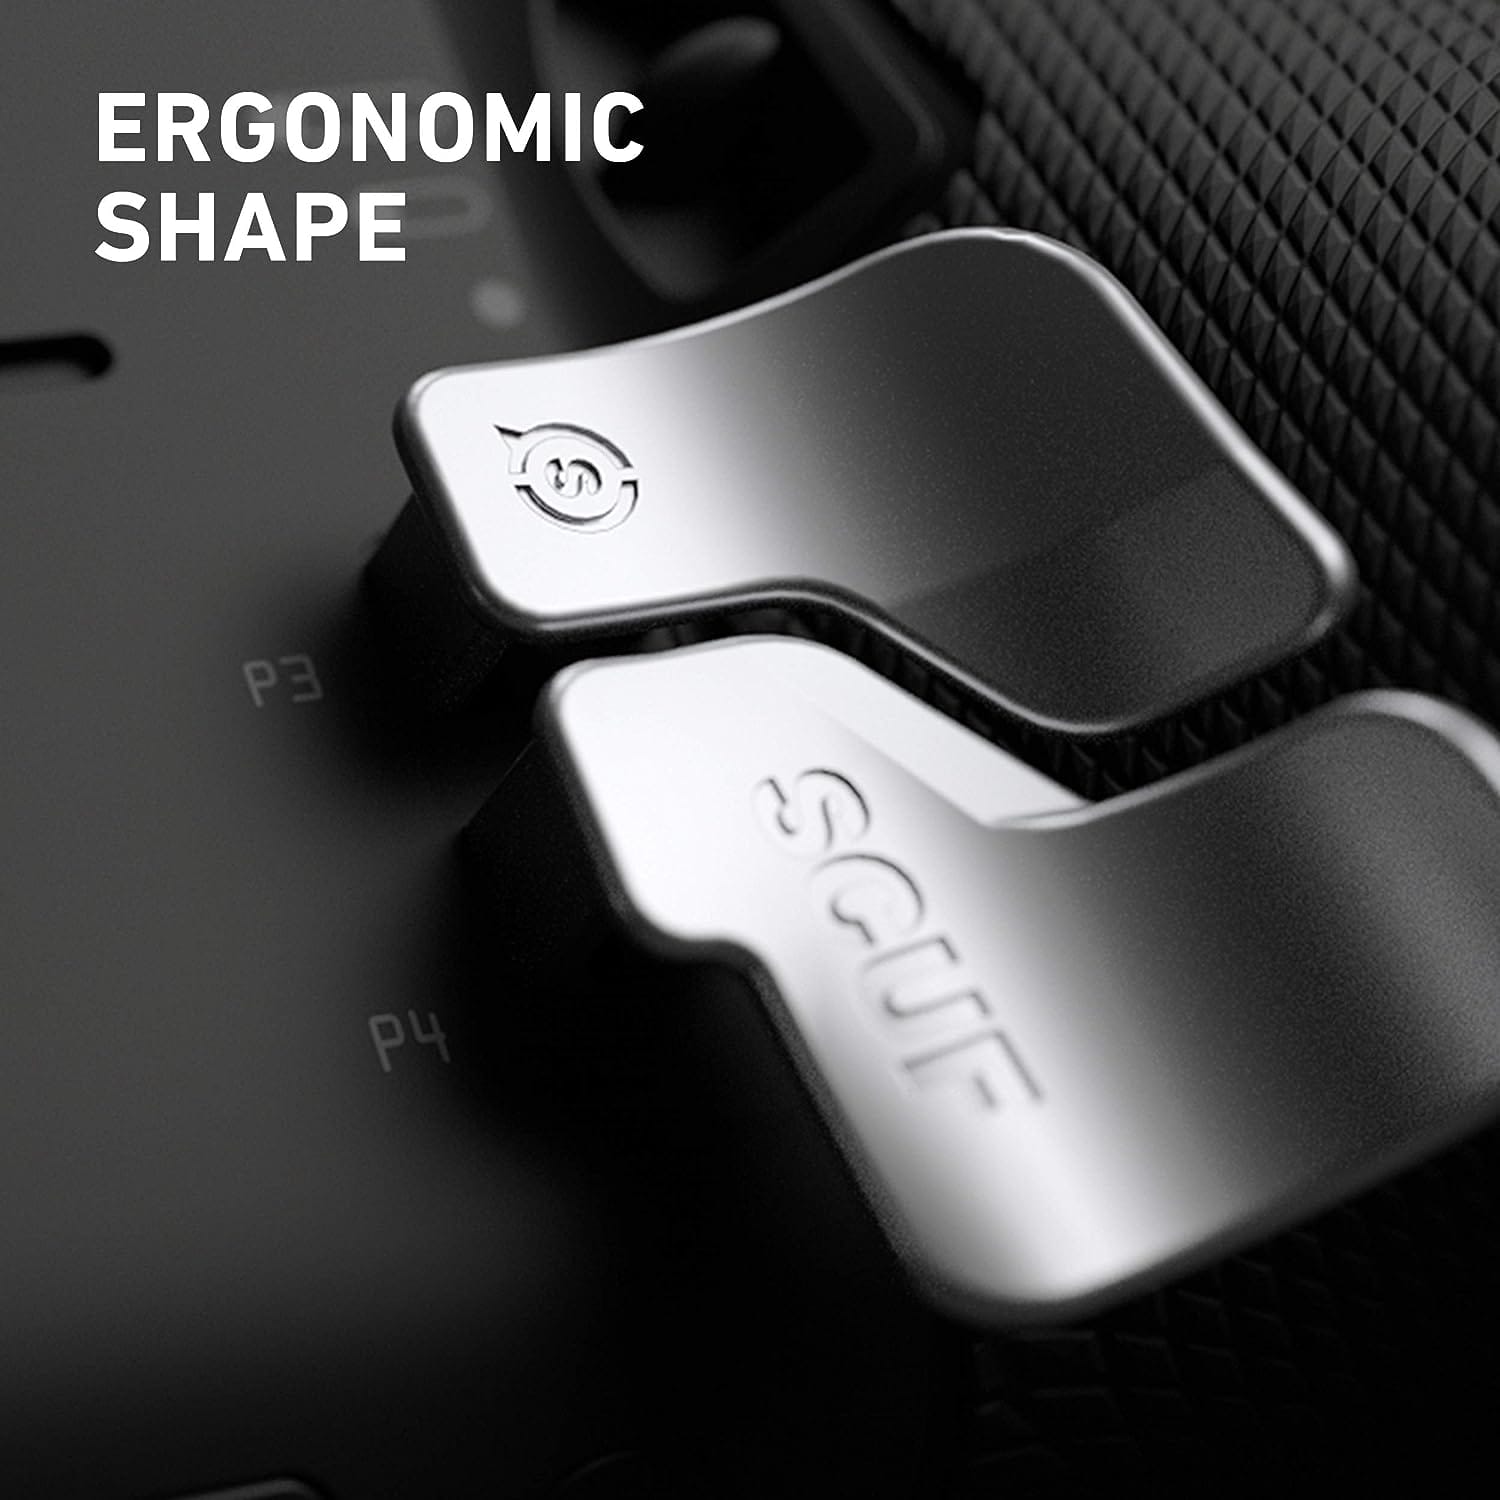 Ergonomic design of SCUF Elite Series 1 and 2 Paddles for comfortable gaming